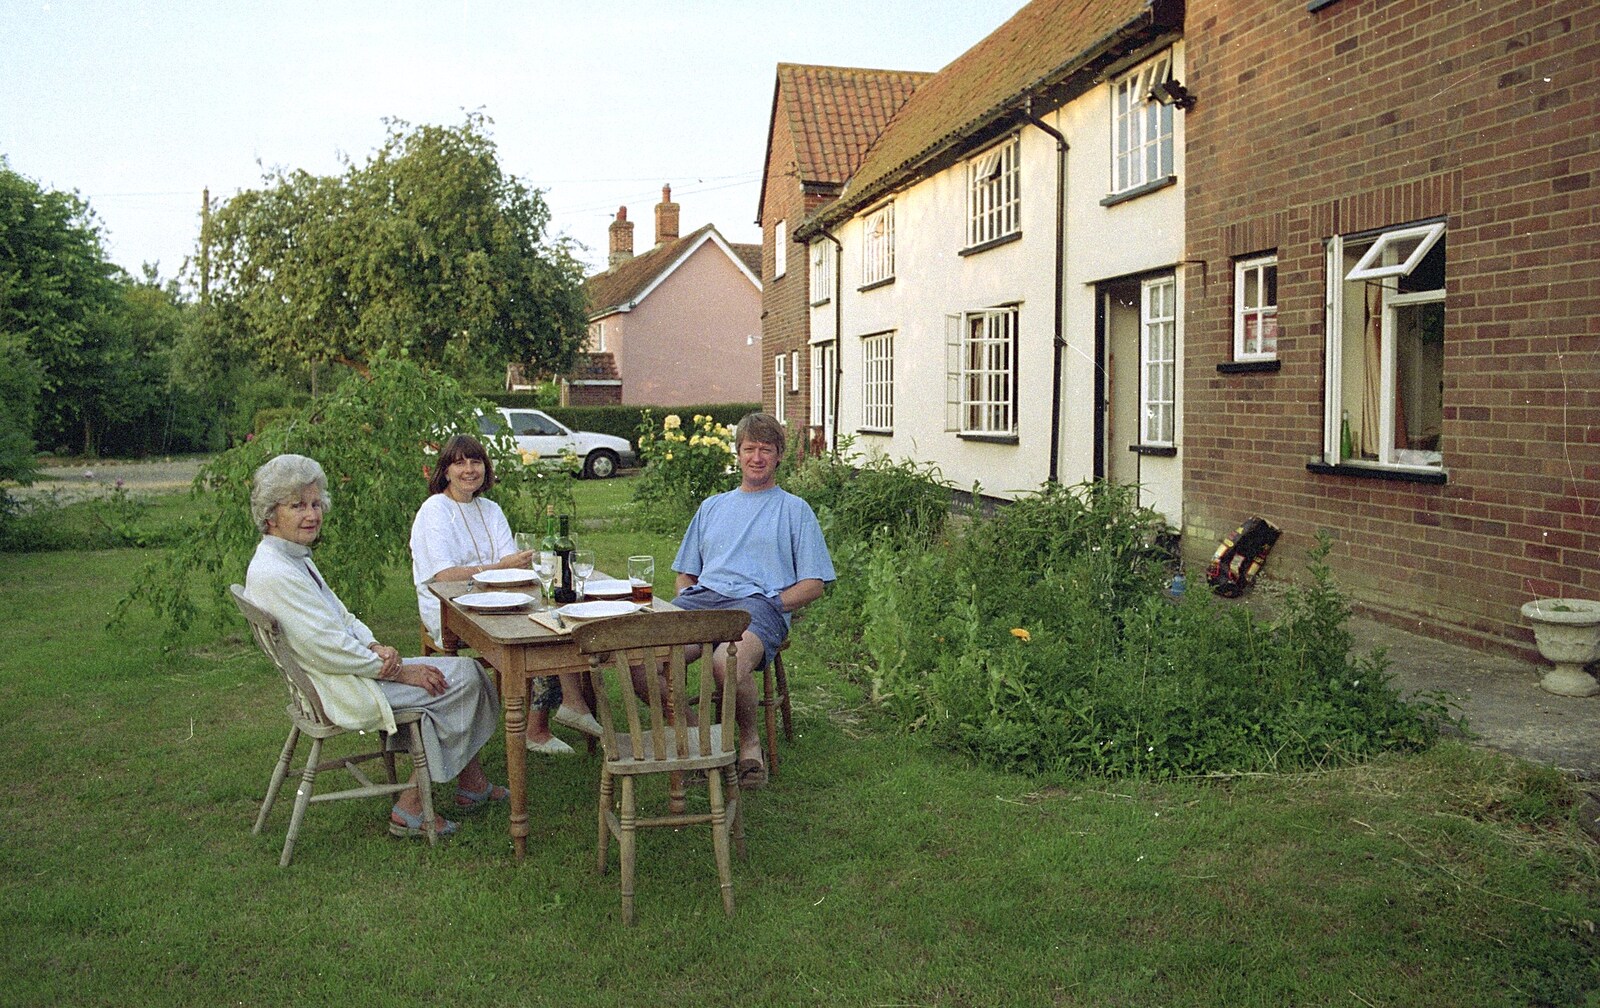 Grandmother, Neil and Caroline Visit, Brome and Orford, Suffolk - 24th July 1995: Outside the house for a spot of 'al fresco' dinner